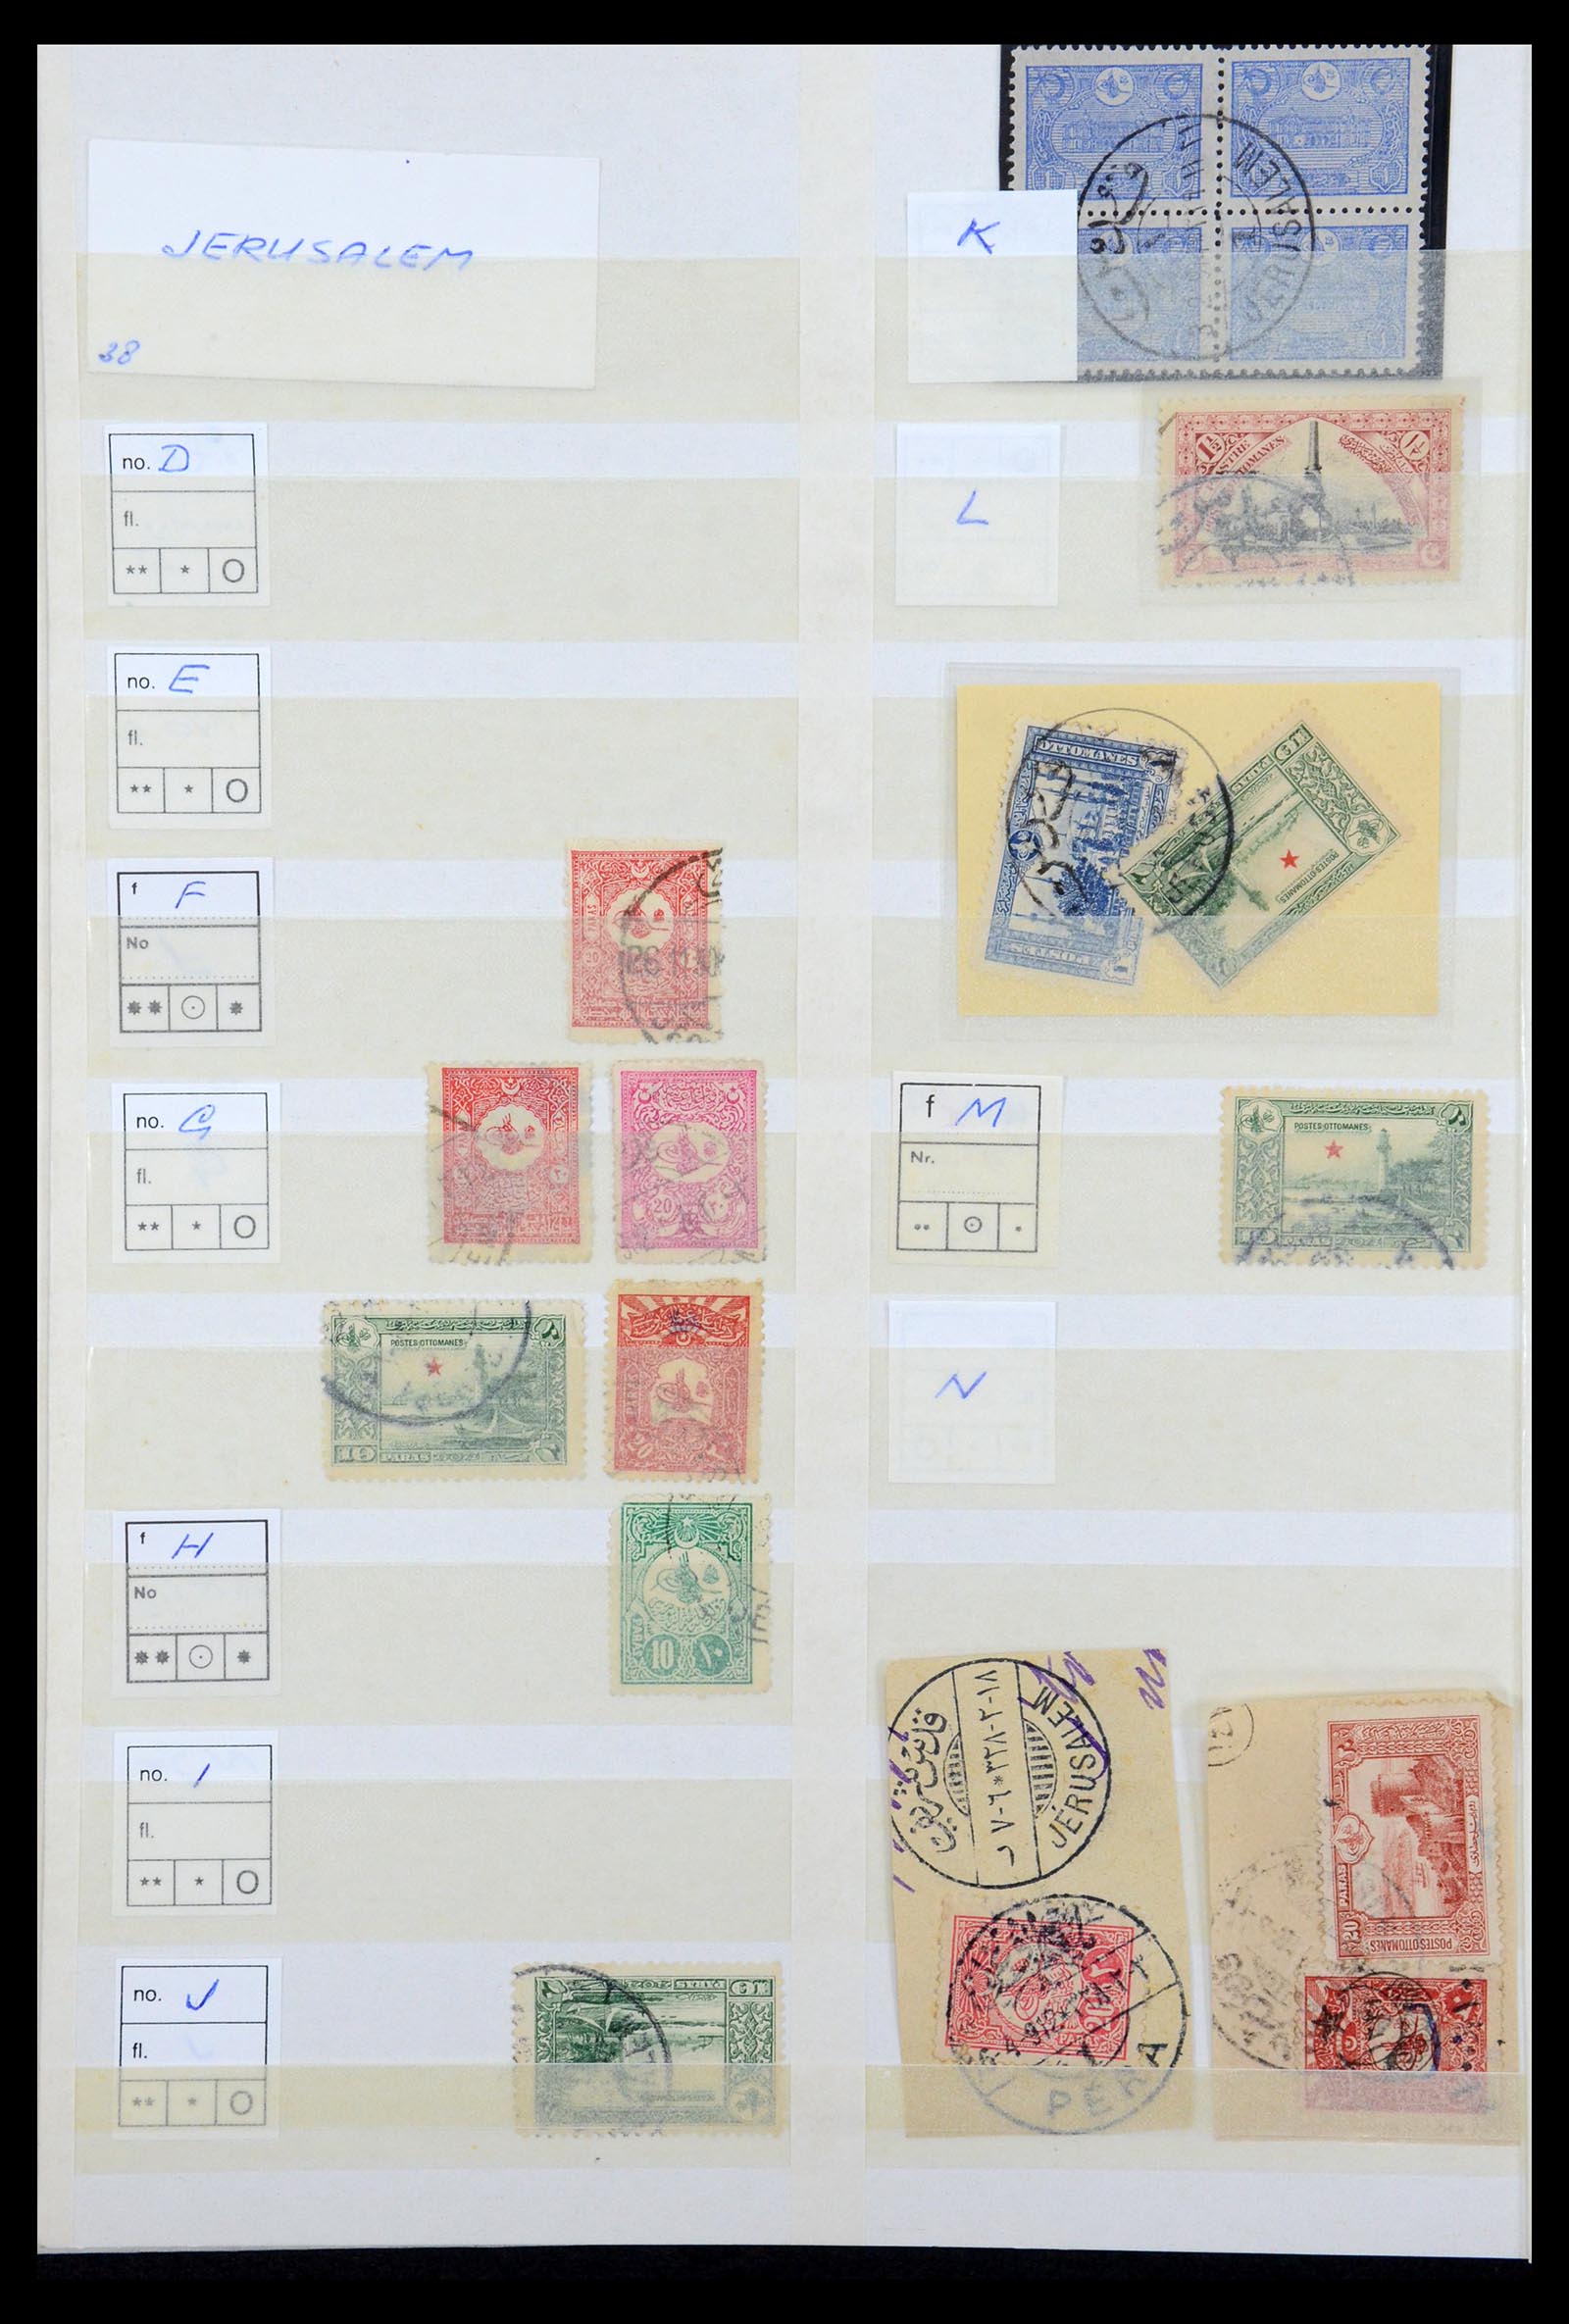 36498 046 - Stamp collection 36498 Palestine and Israel cancels 1880-1970.